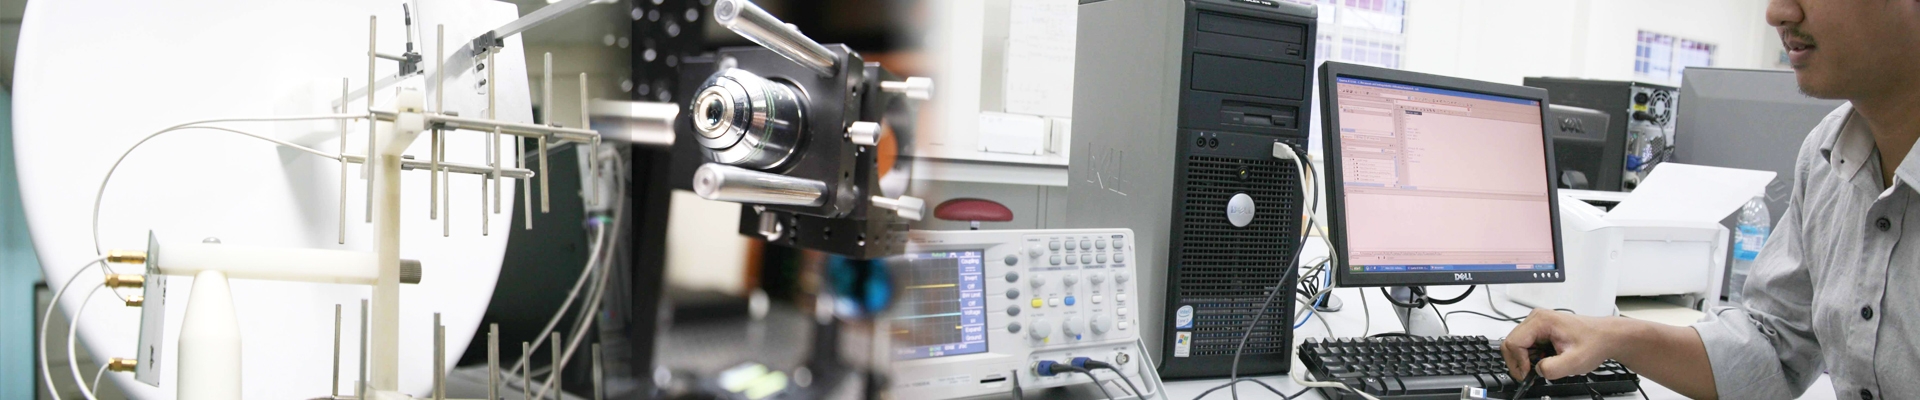 Tech Gadgets For Video Manufacturing